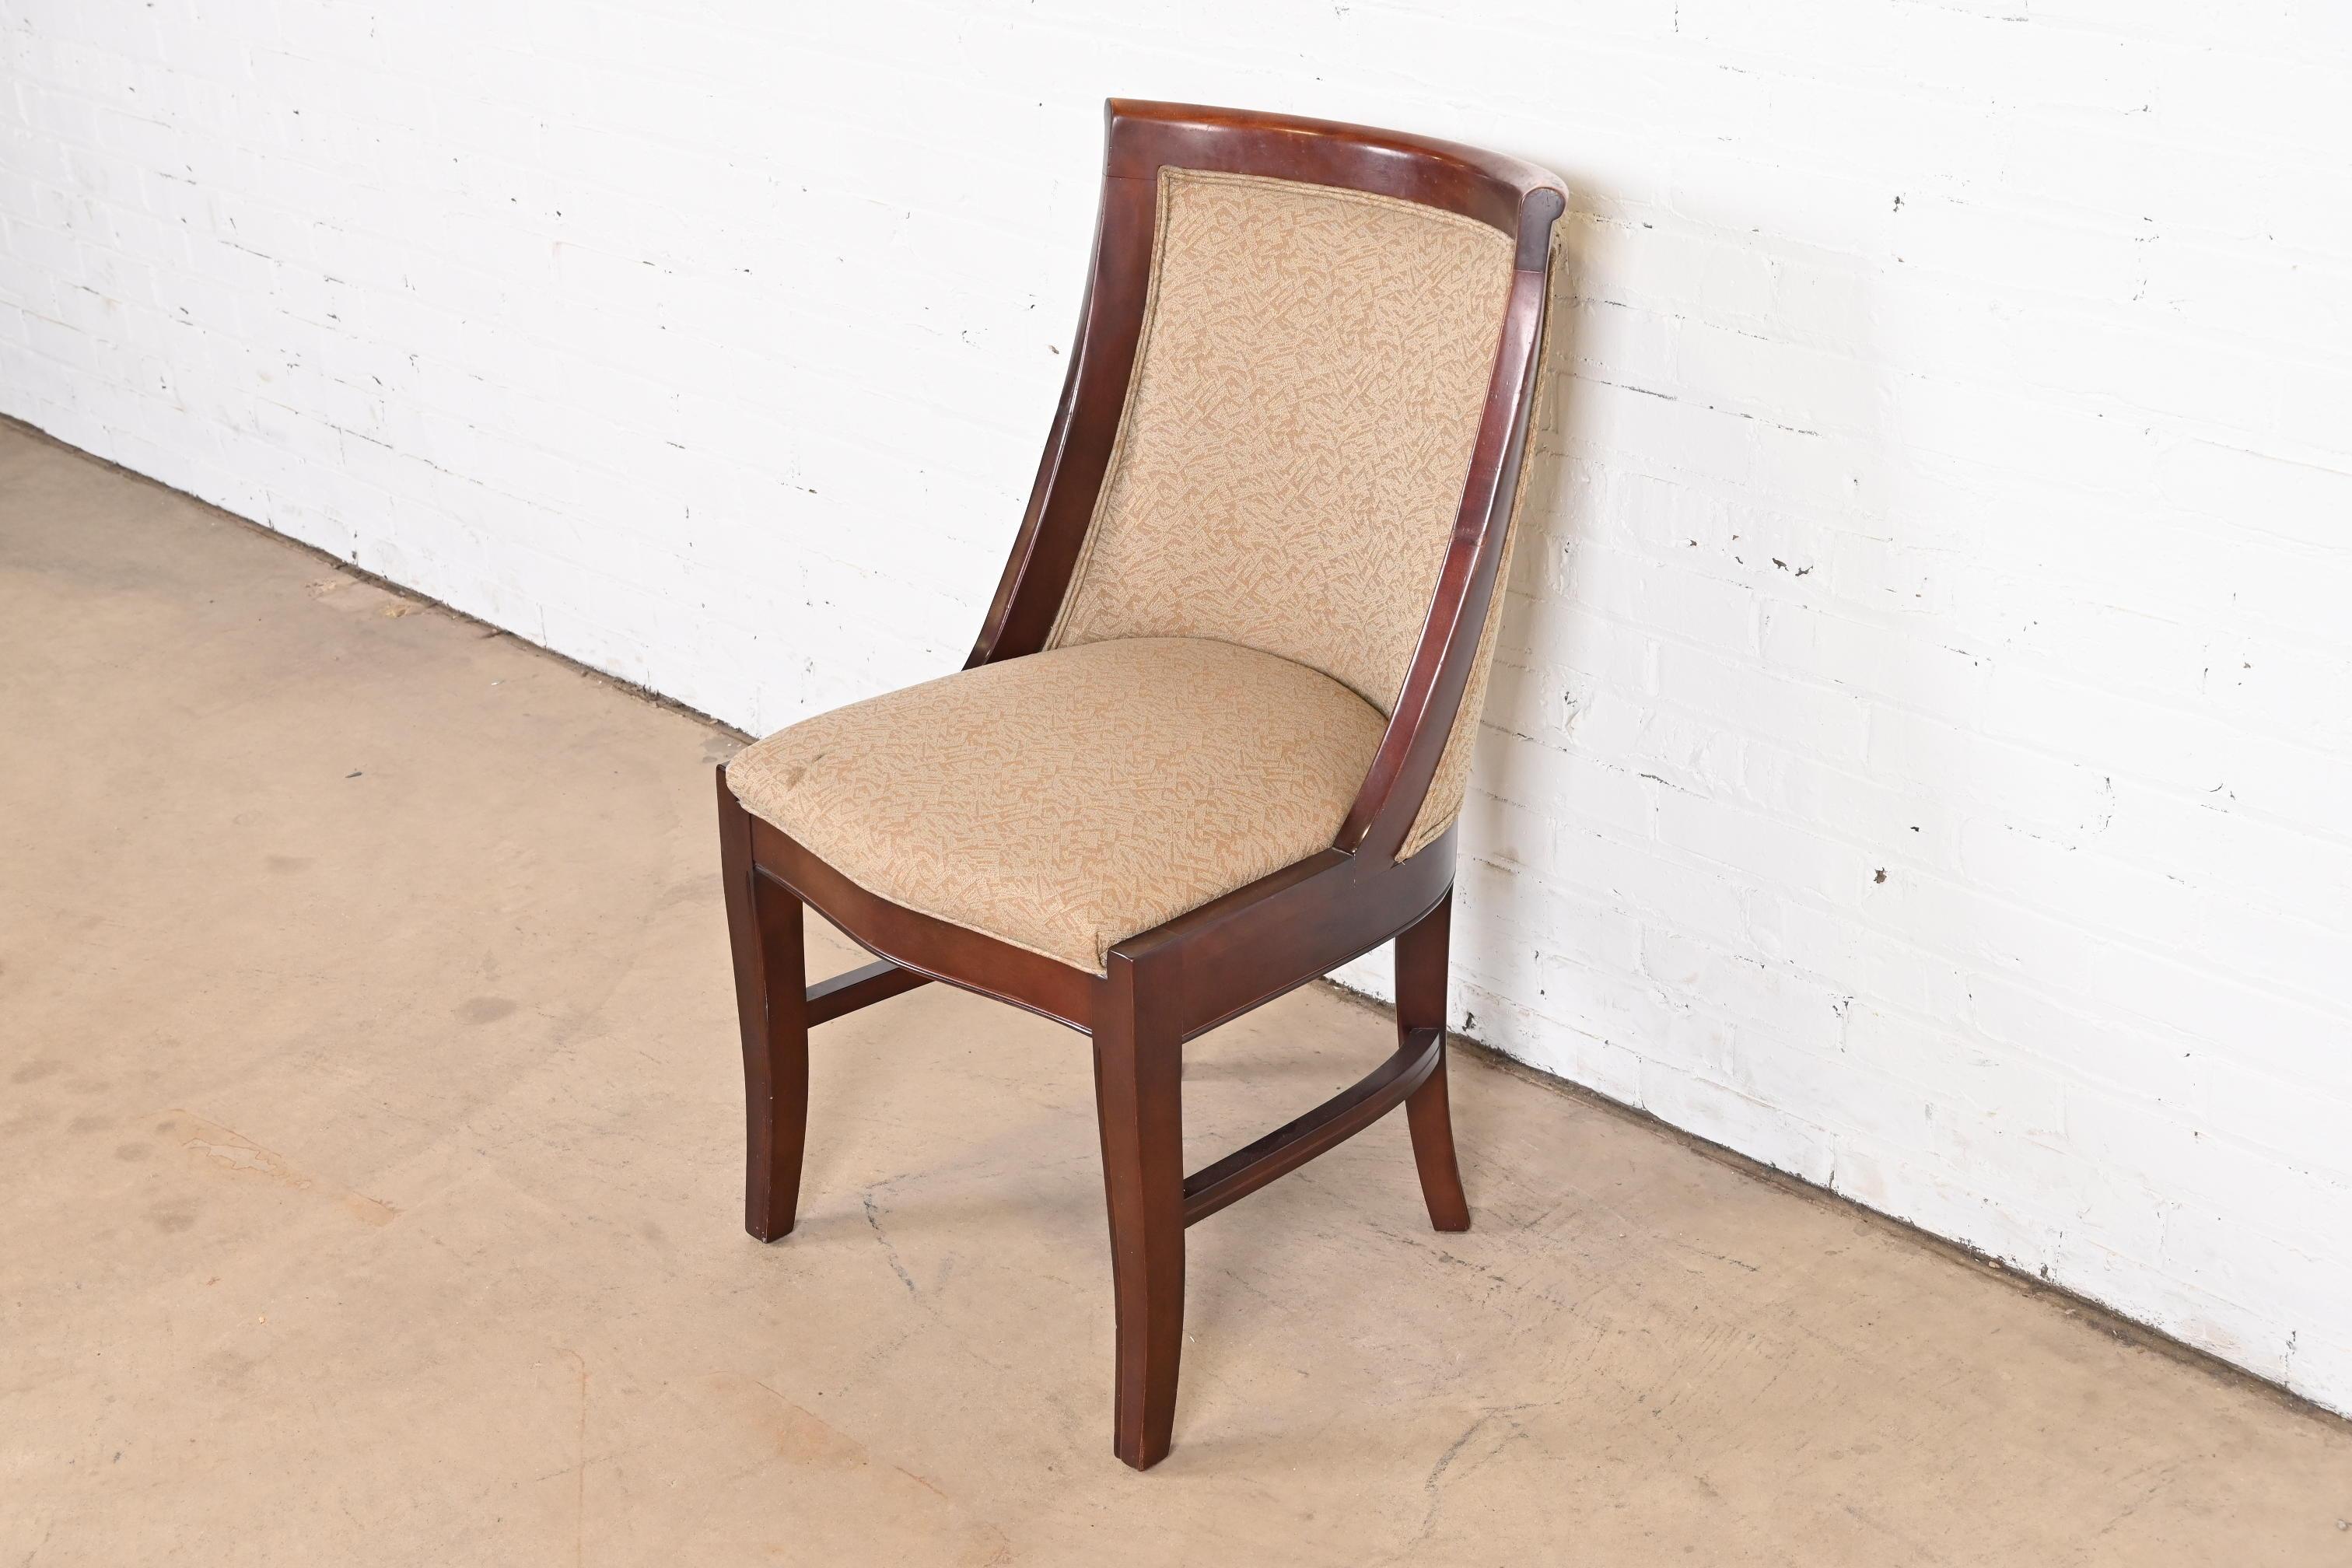 A gorgeous modern Art Deco style upholstered side chair or desk chair

Attributed to Barbara Barry for Baker Furniture

USA, circa 1990s

Carved mahogany frame, with upholstered seat and back.

Measures: 20